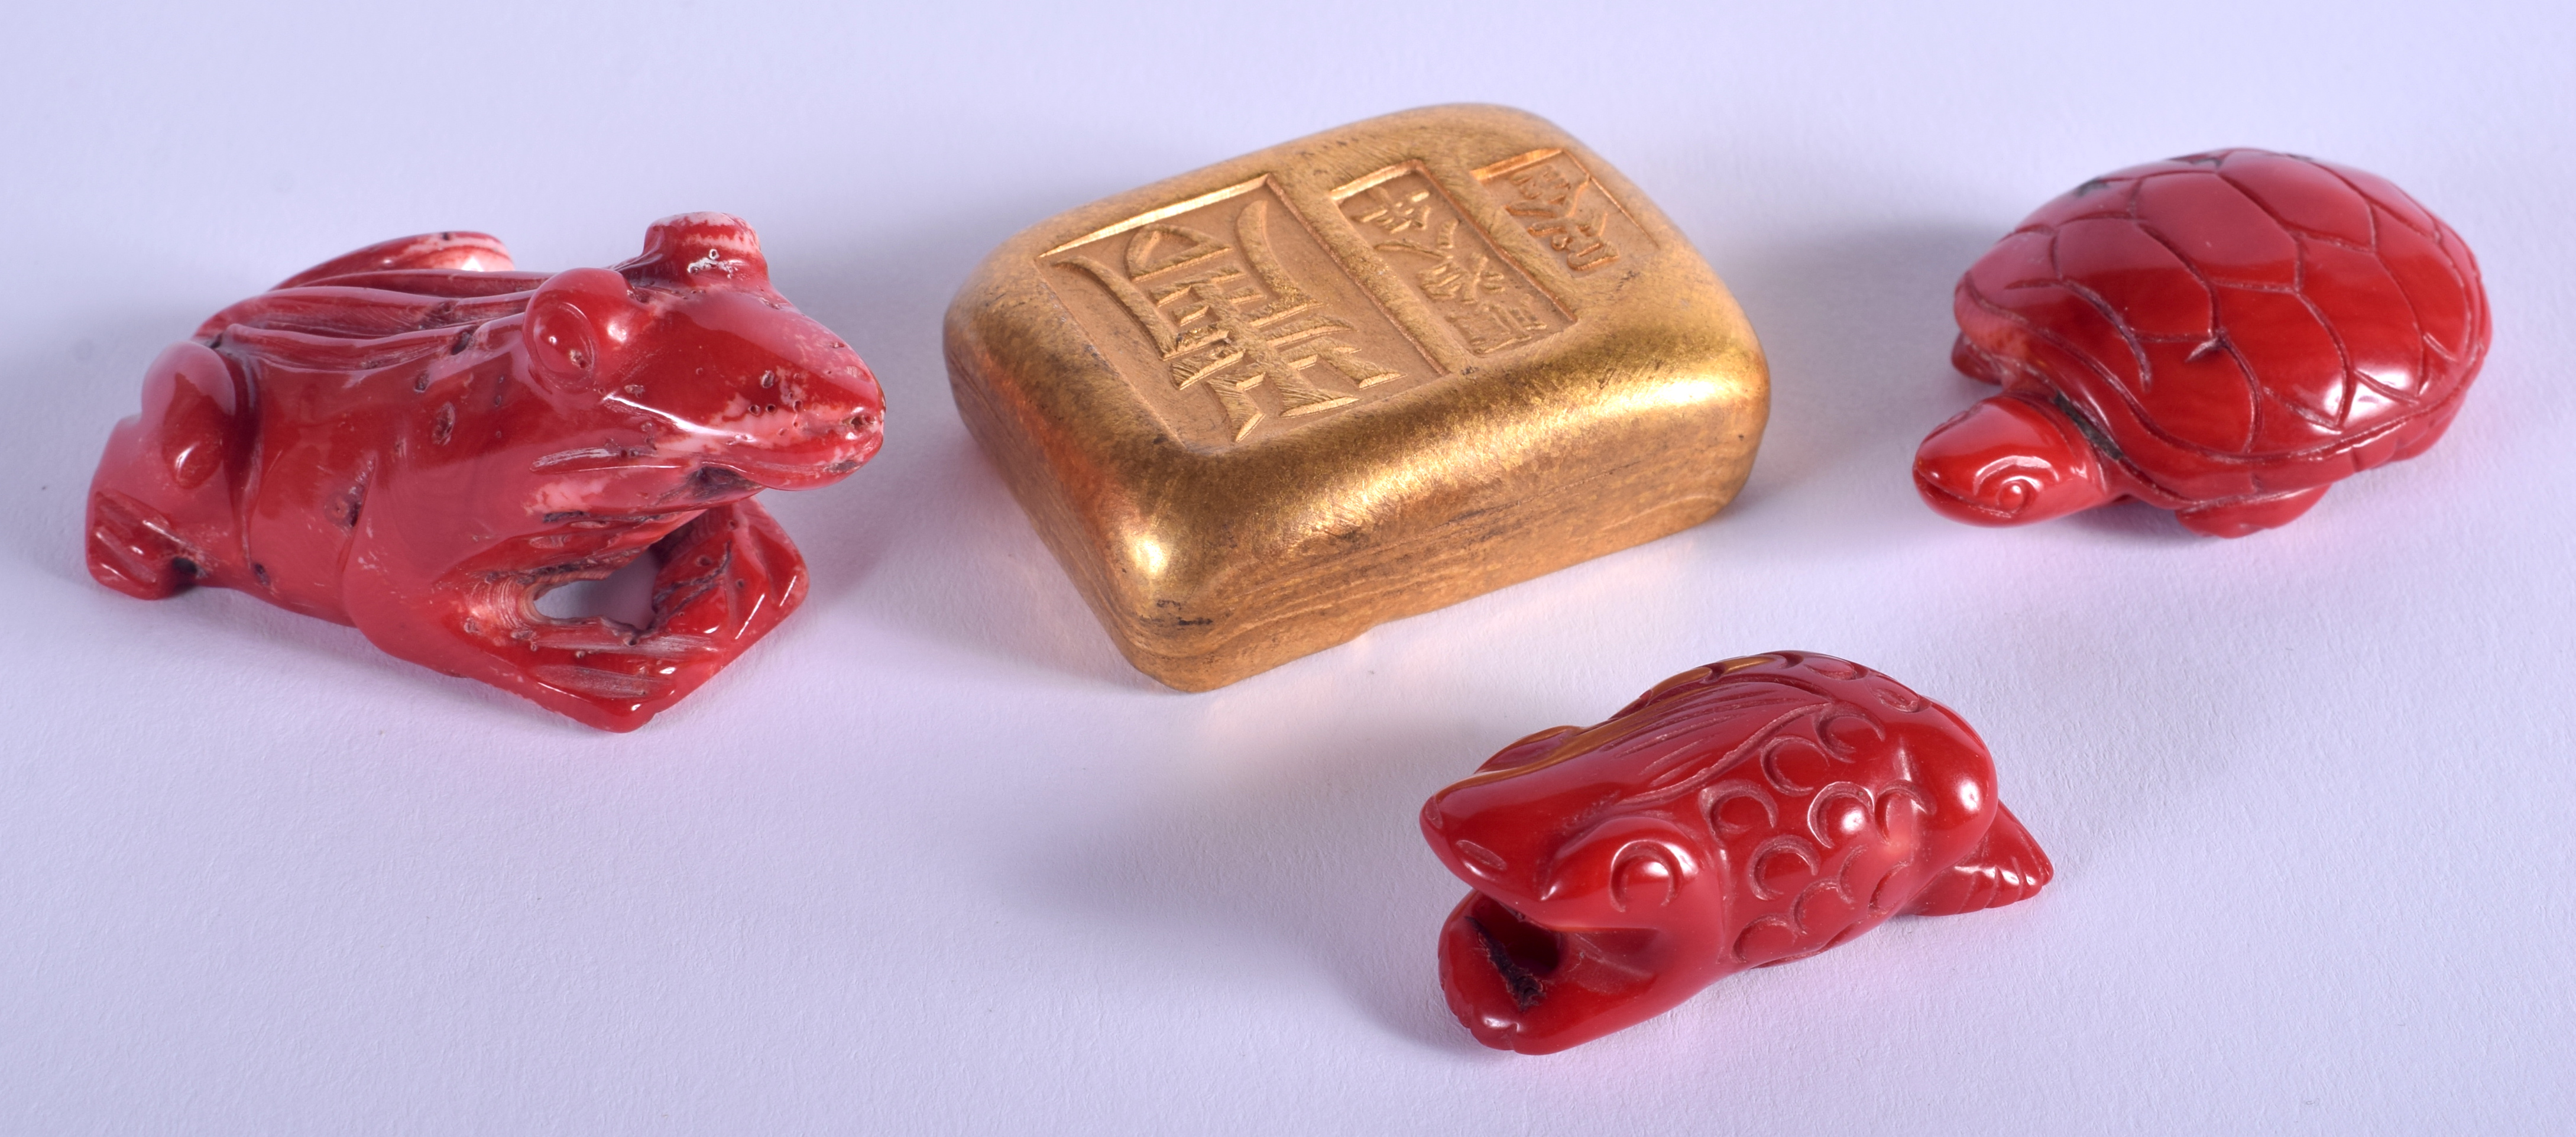 A CONTEMPORARY CHINESE YELLOW METAL INGOT together with three vintage coral figures. (4)